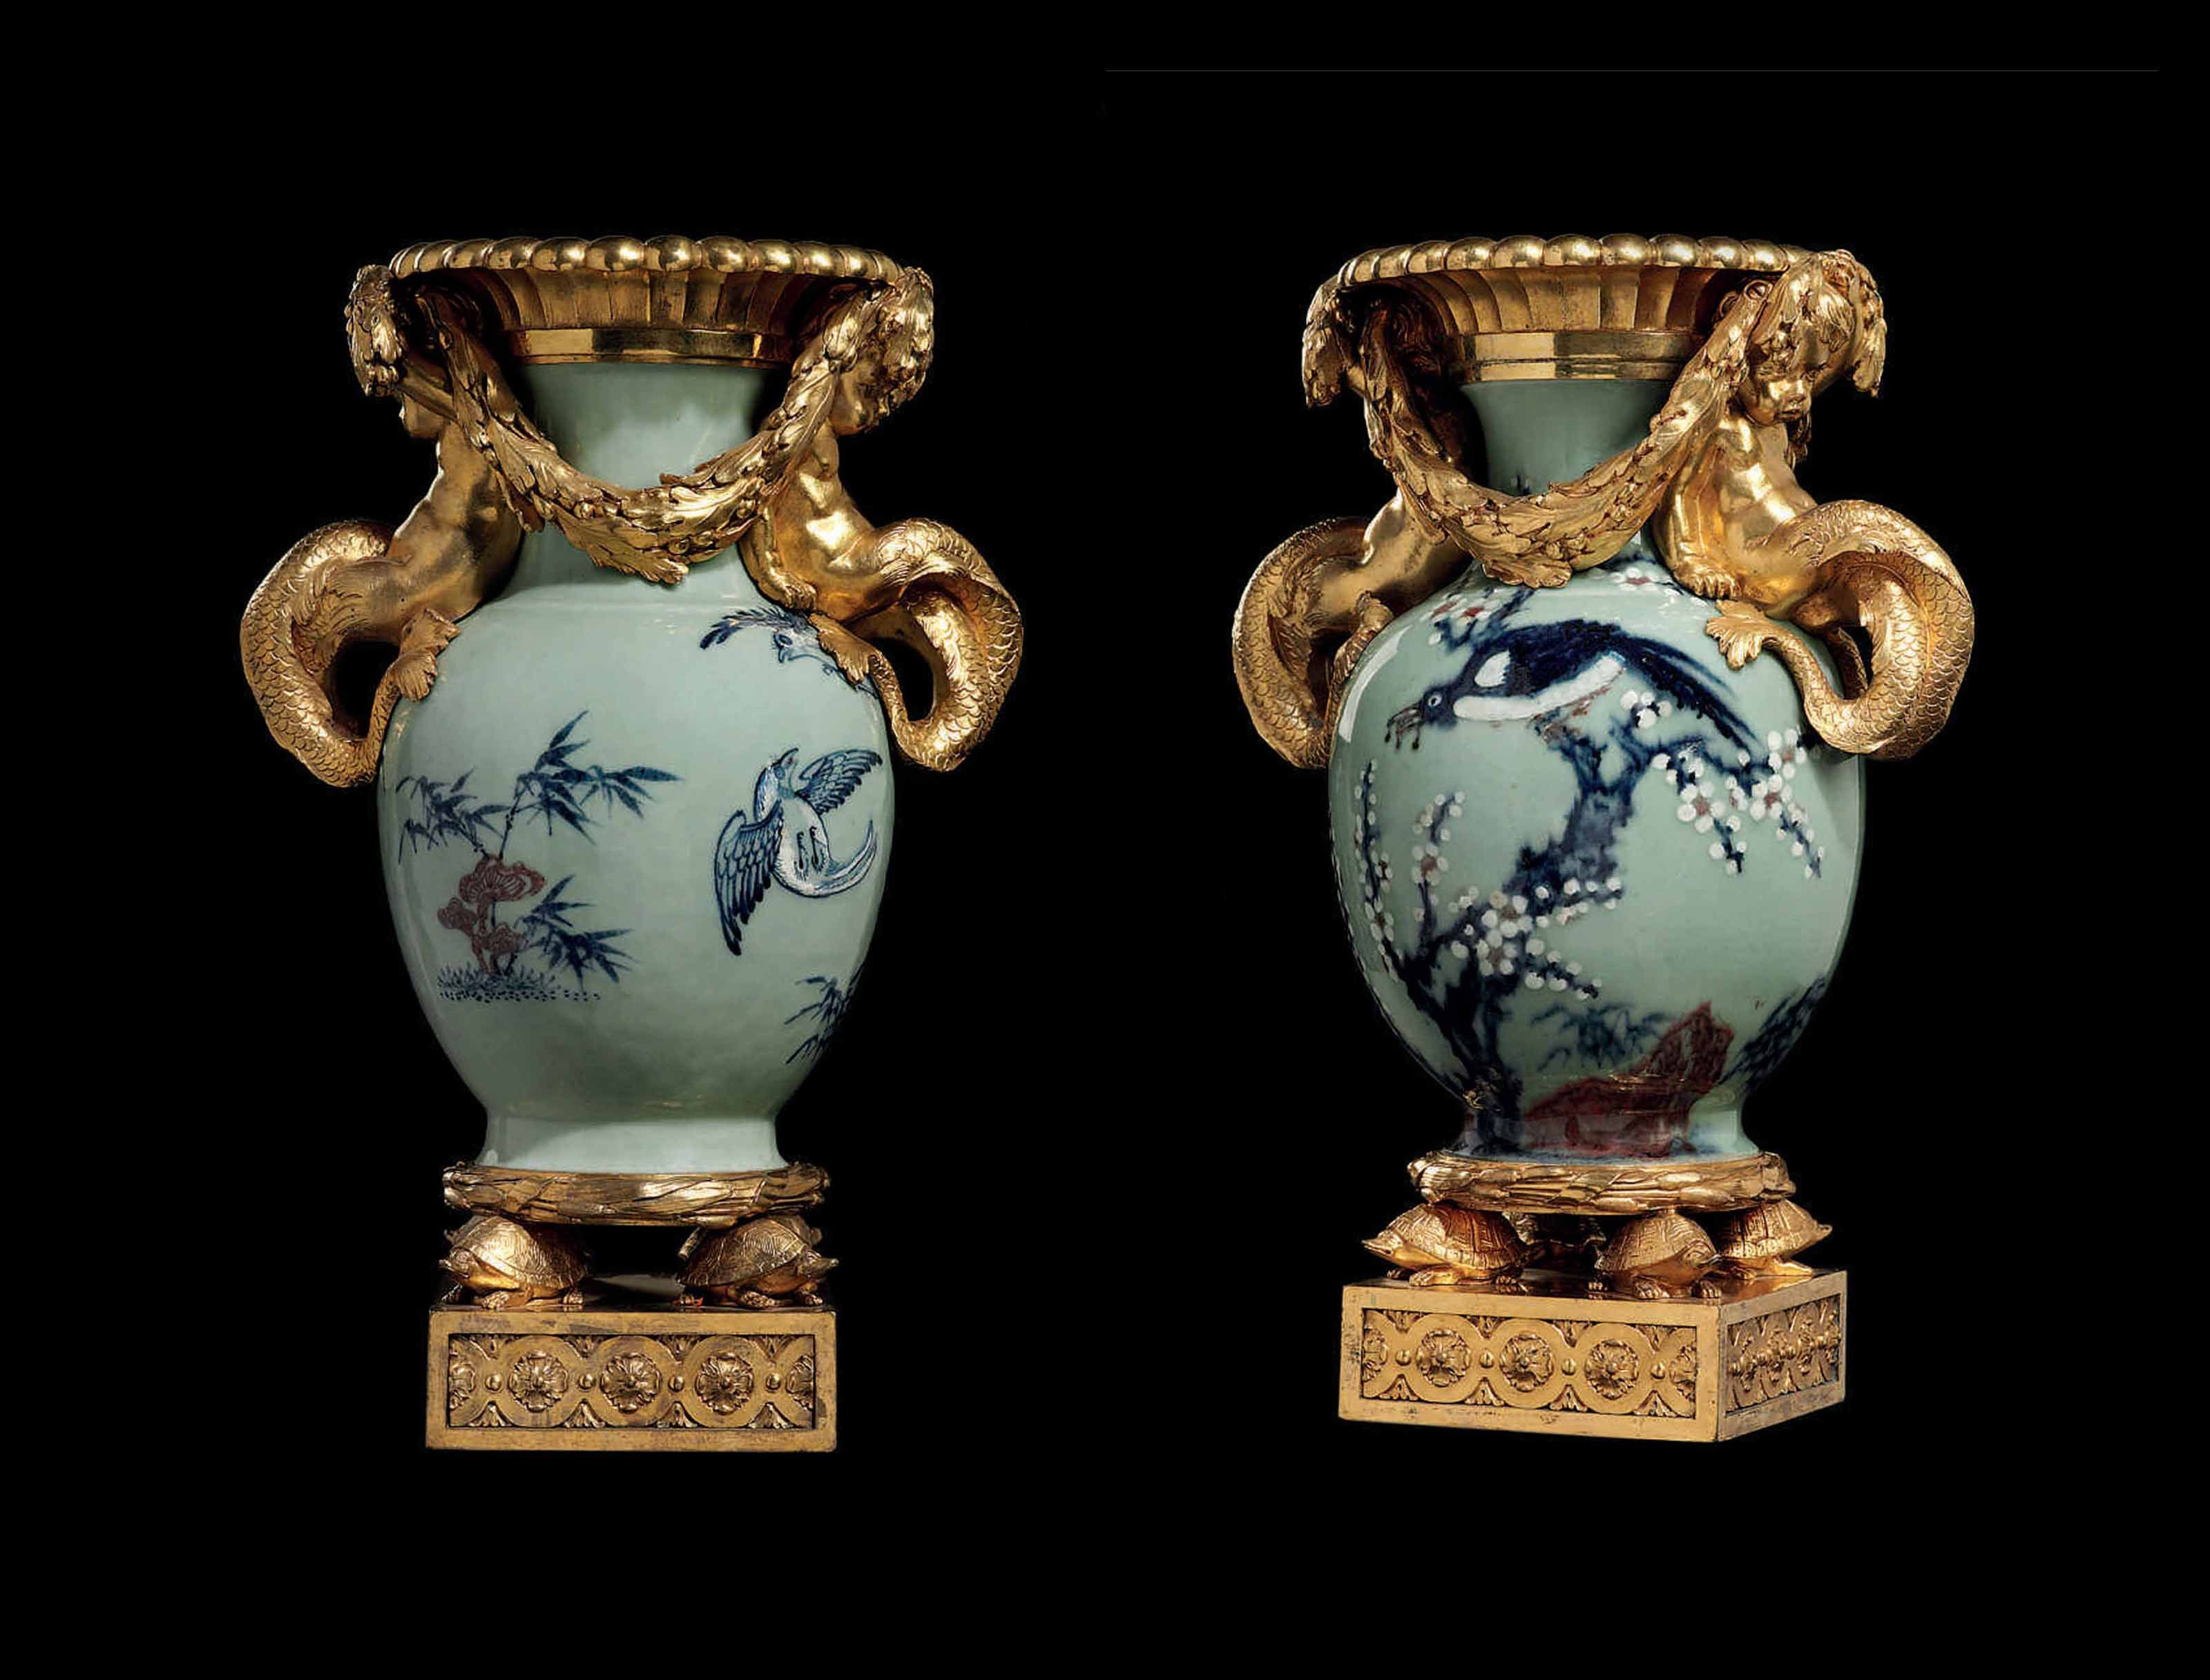 14 Popular Qianlong Vase Price 2022 free download qianlong vase price of c1770 lot 14 a near pair of late louis xv ormolu mounted chinese with regard to a near pair of late louis xv ormolu mounted chinese celadon porcelain vases aux tritons